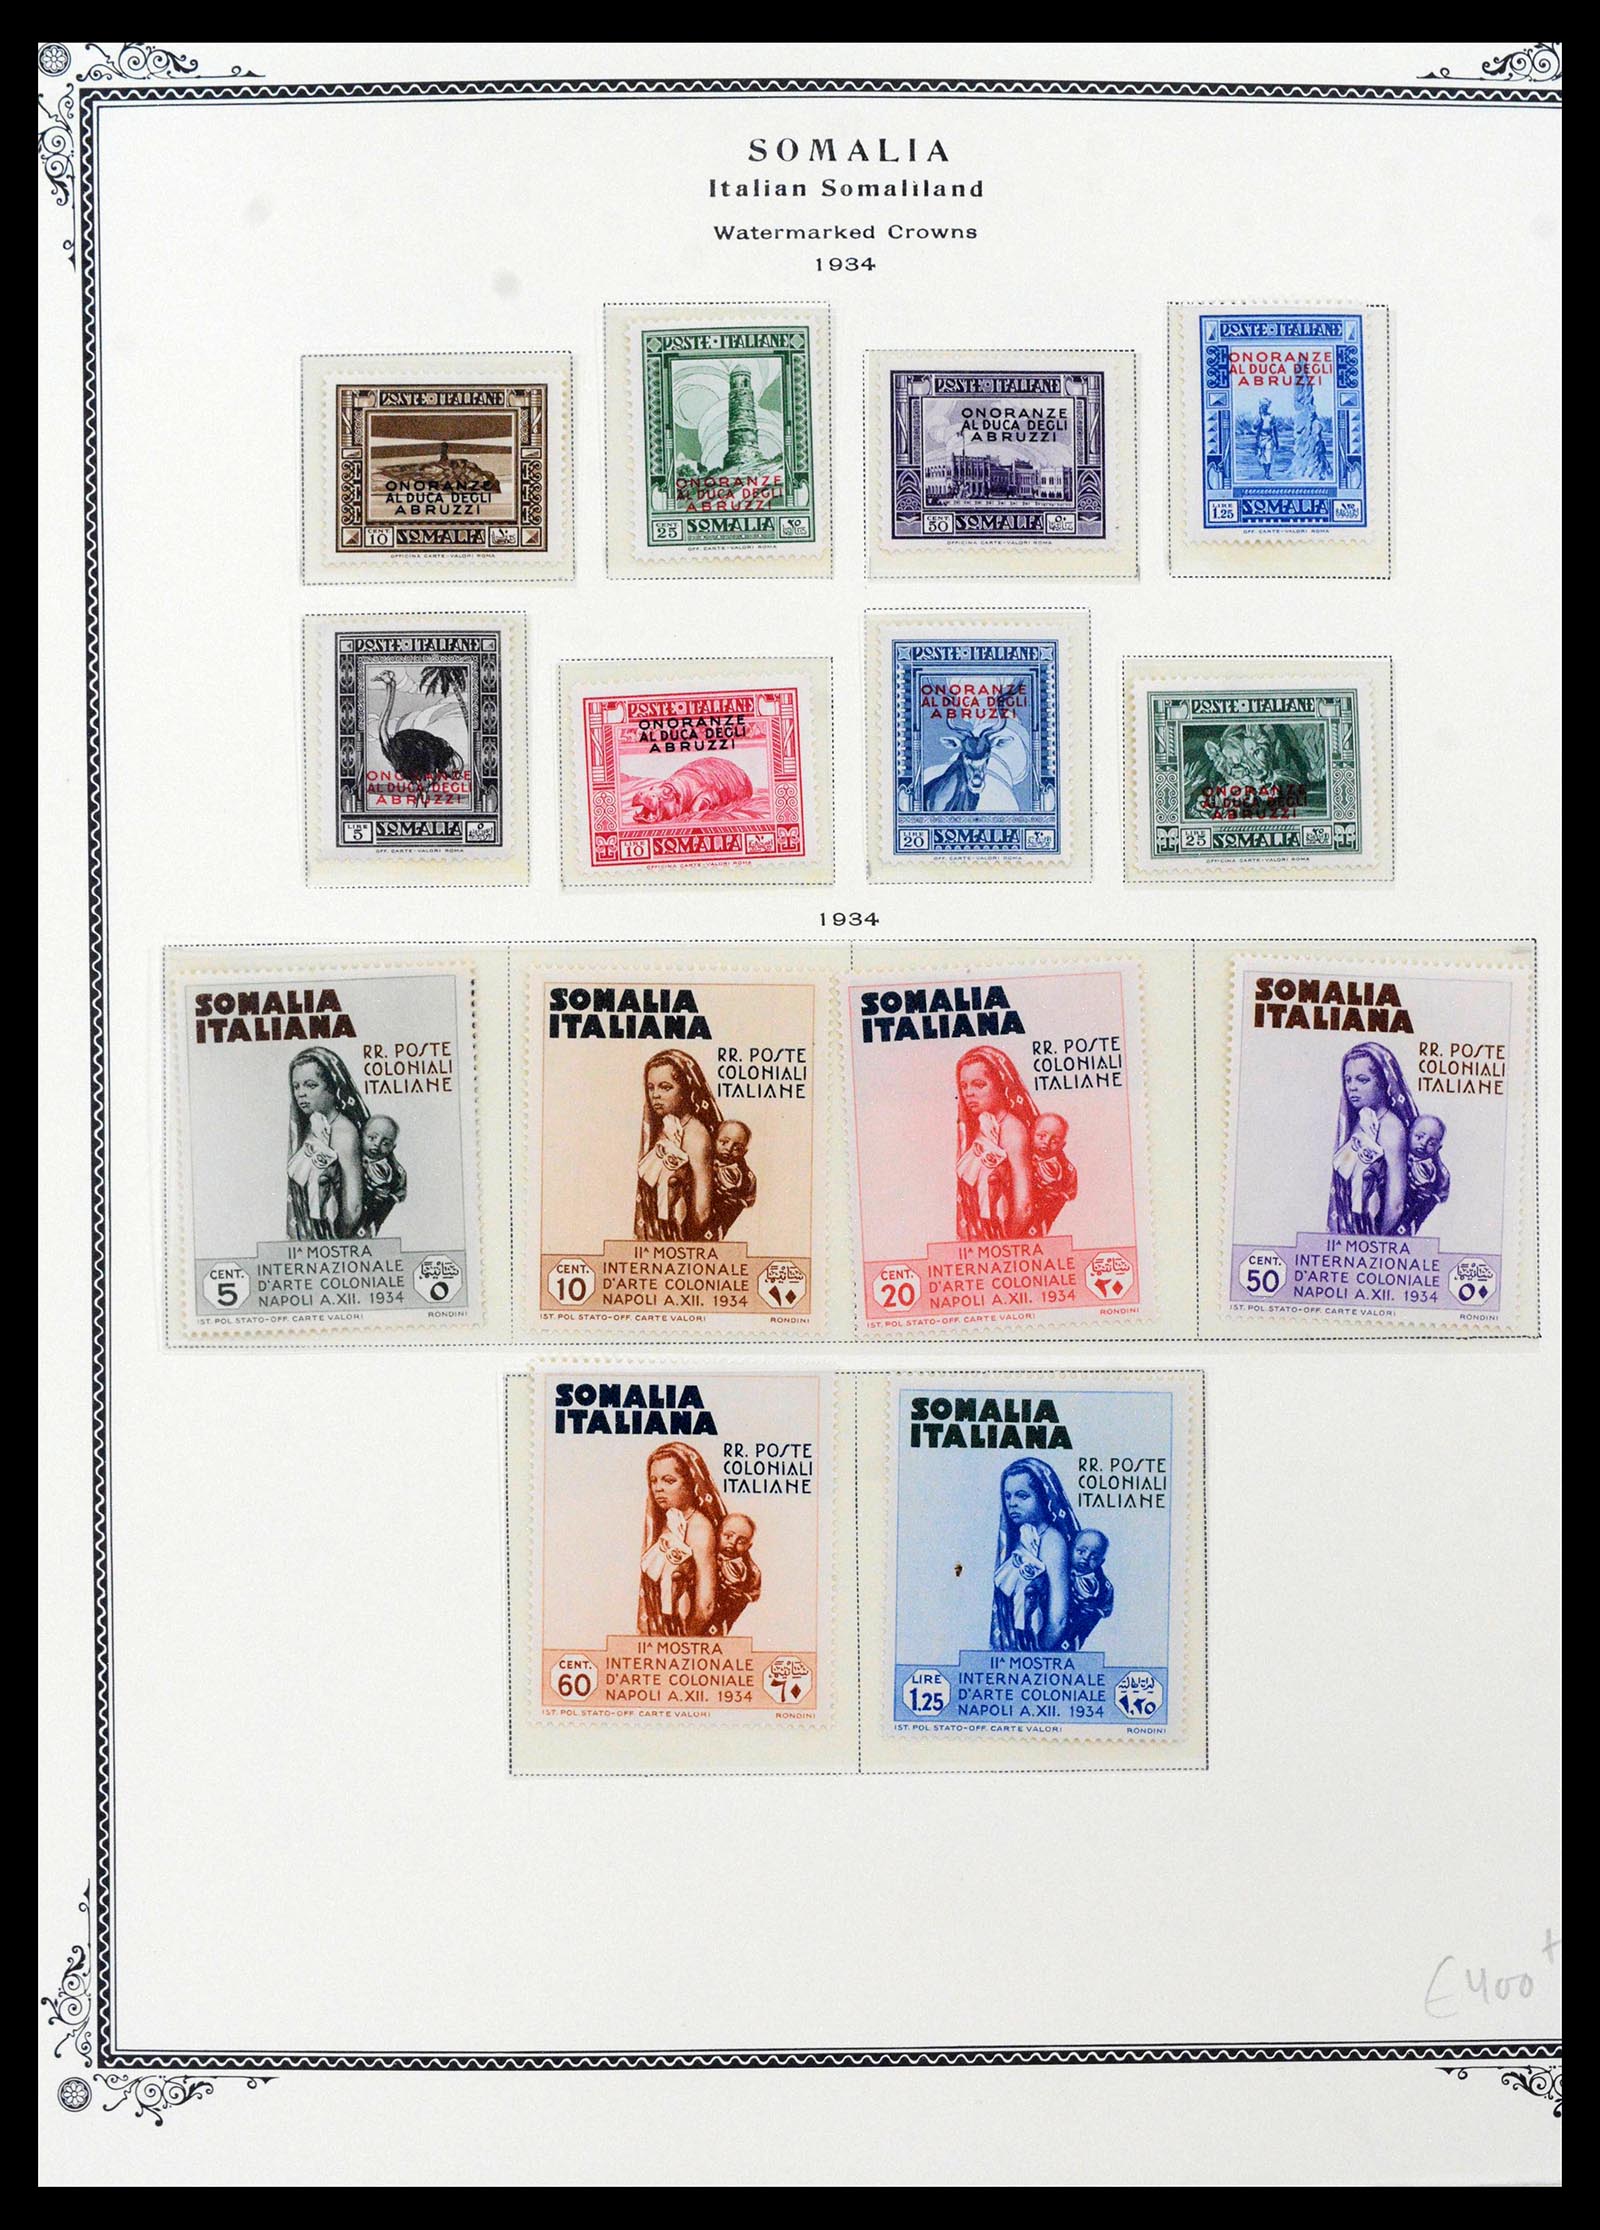 39011 0016 - Stamp collection 39011 Somalia complete 1903-1960.